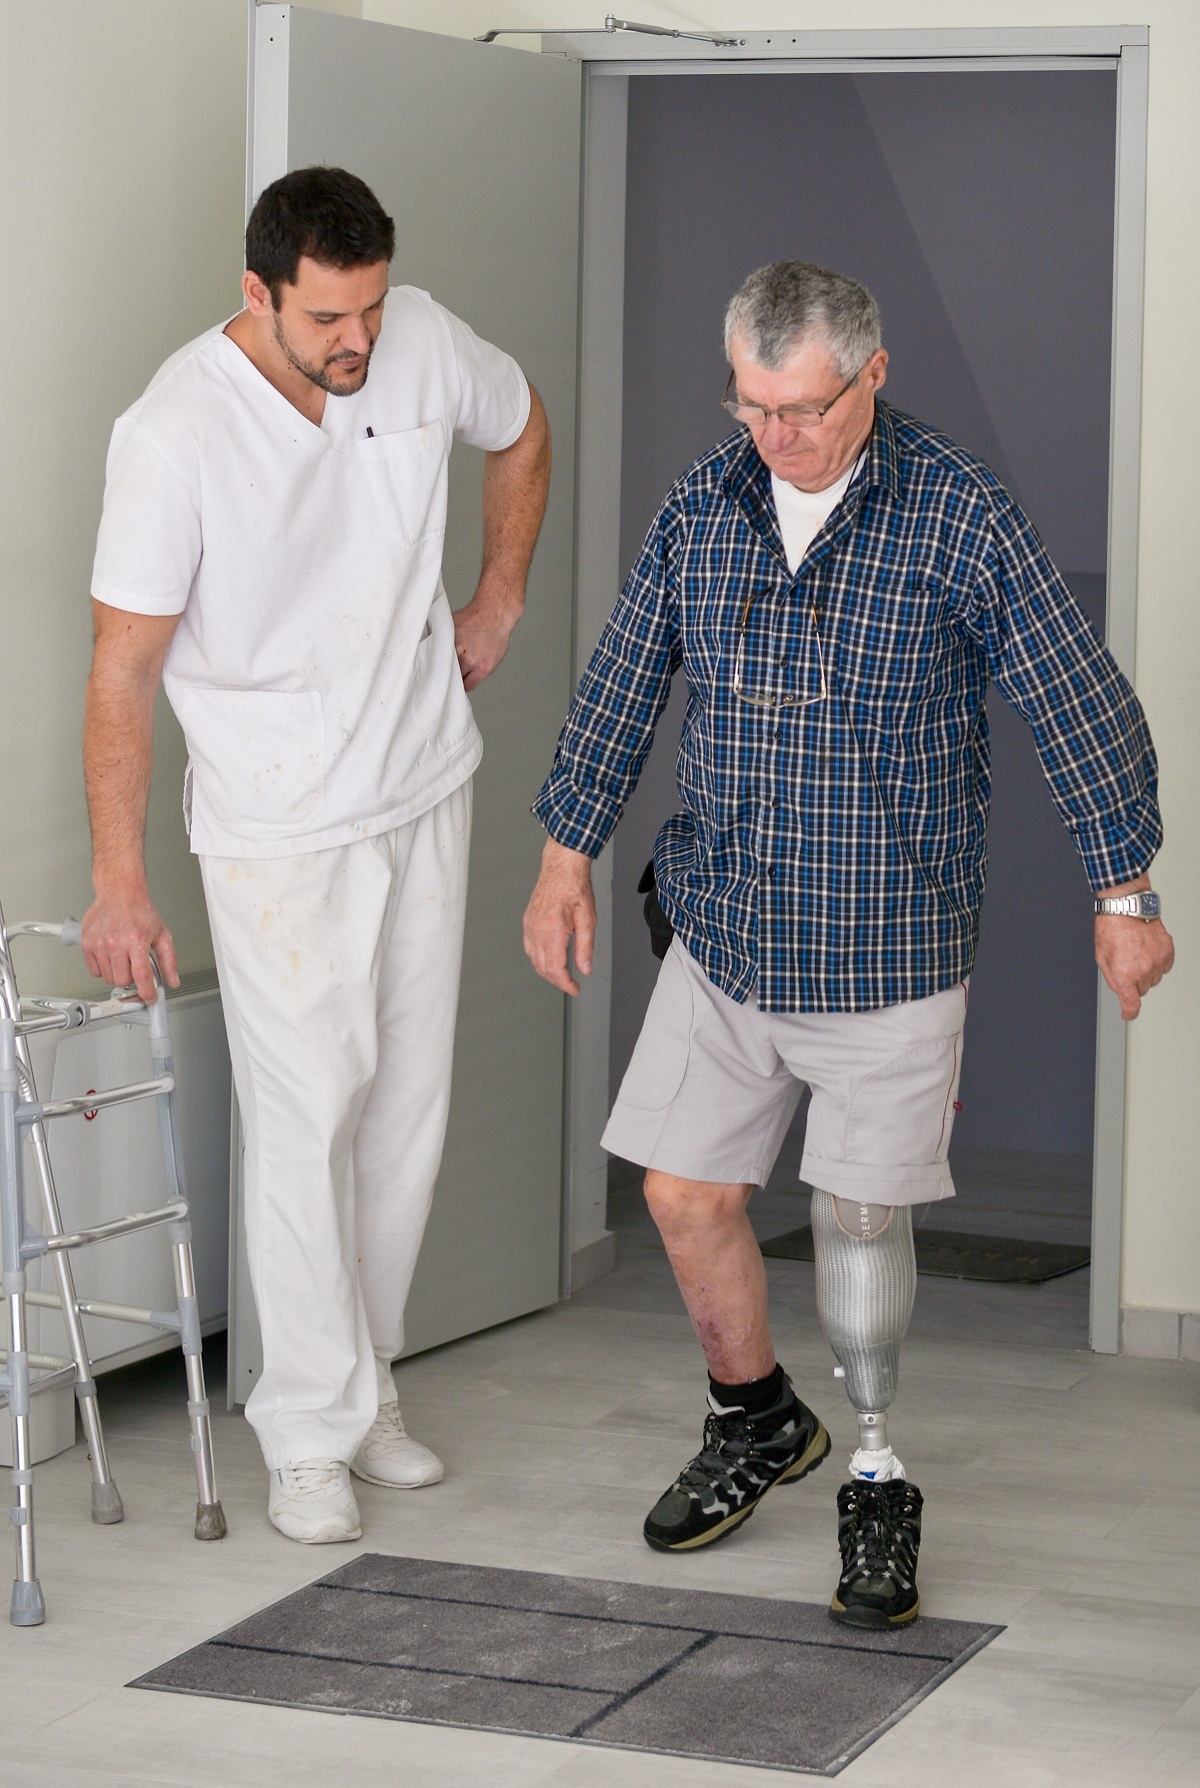 Gait training for lower limb amputees